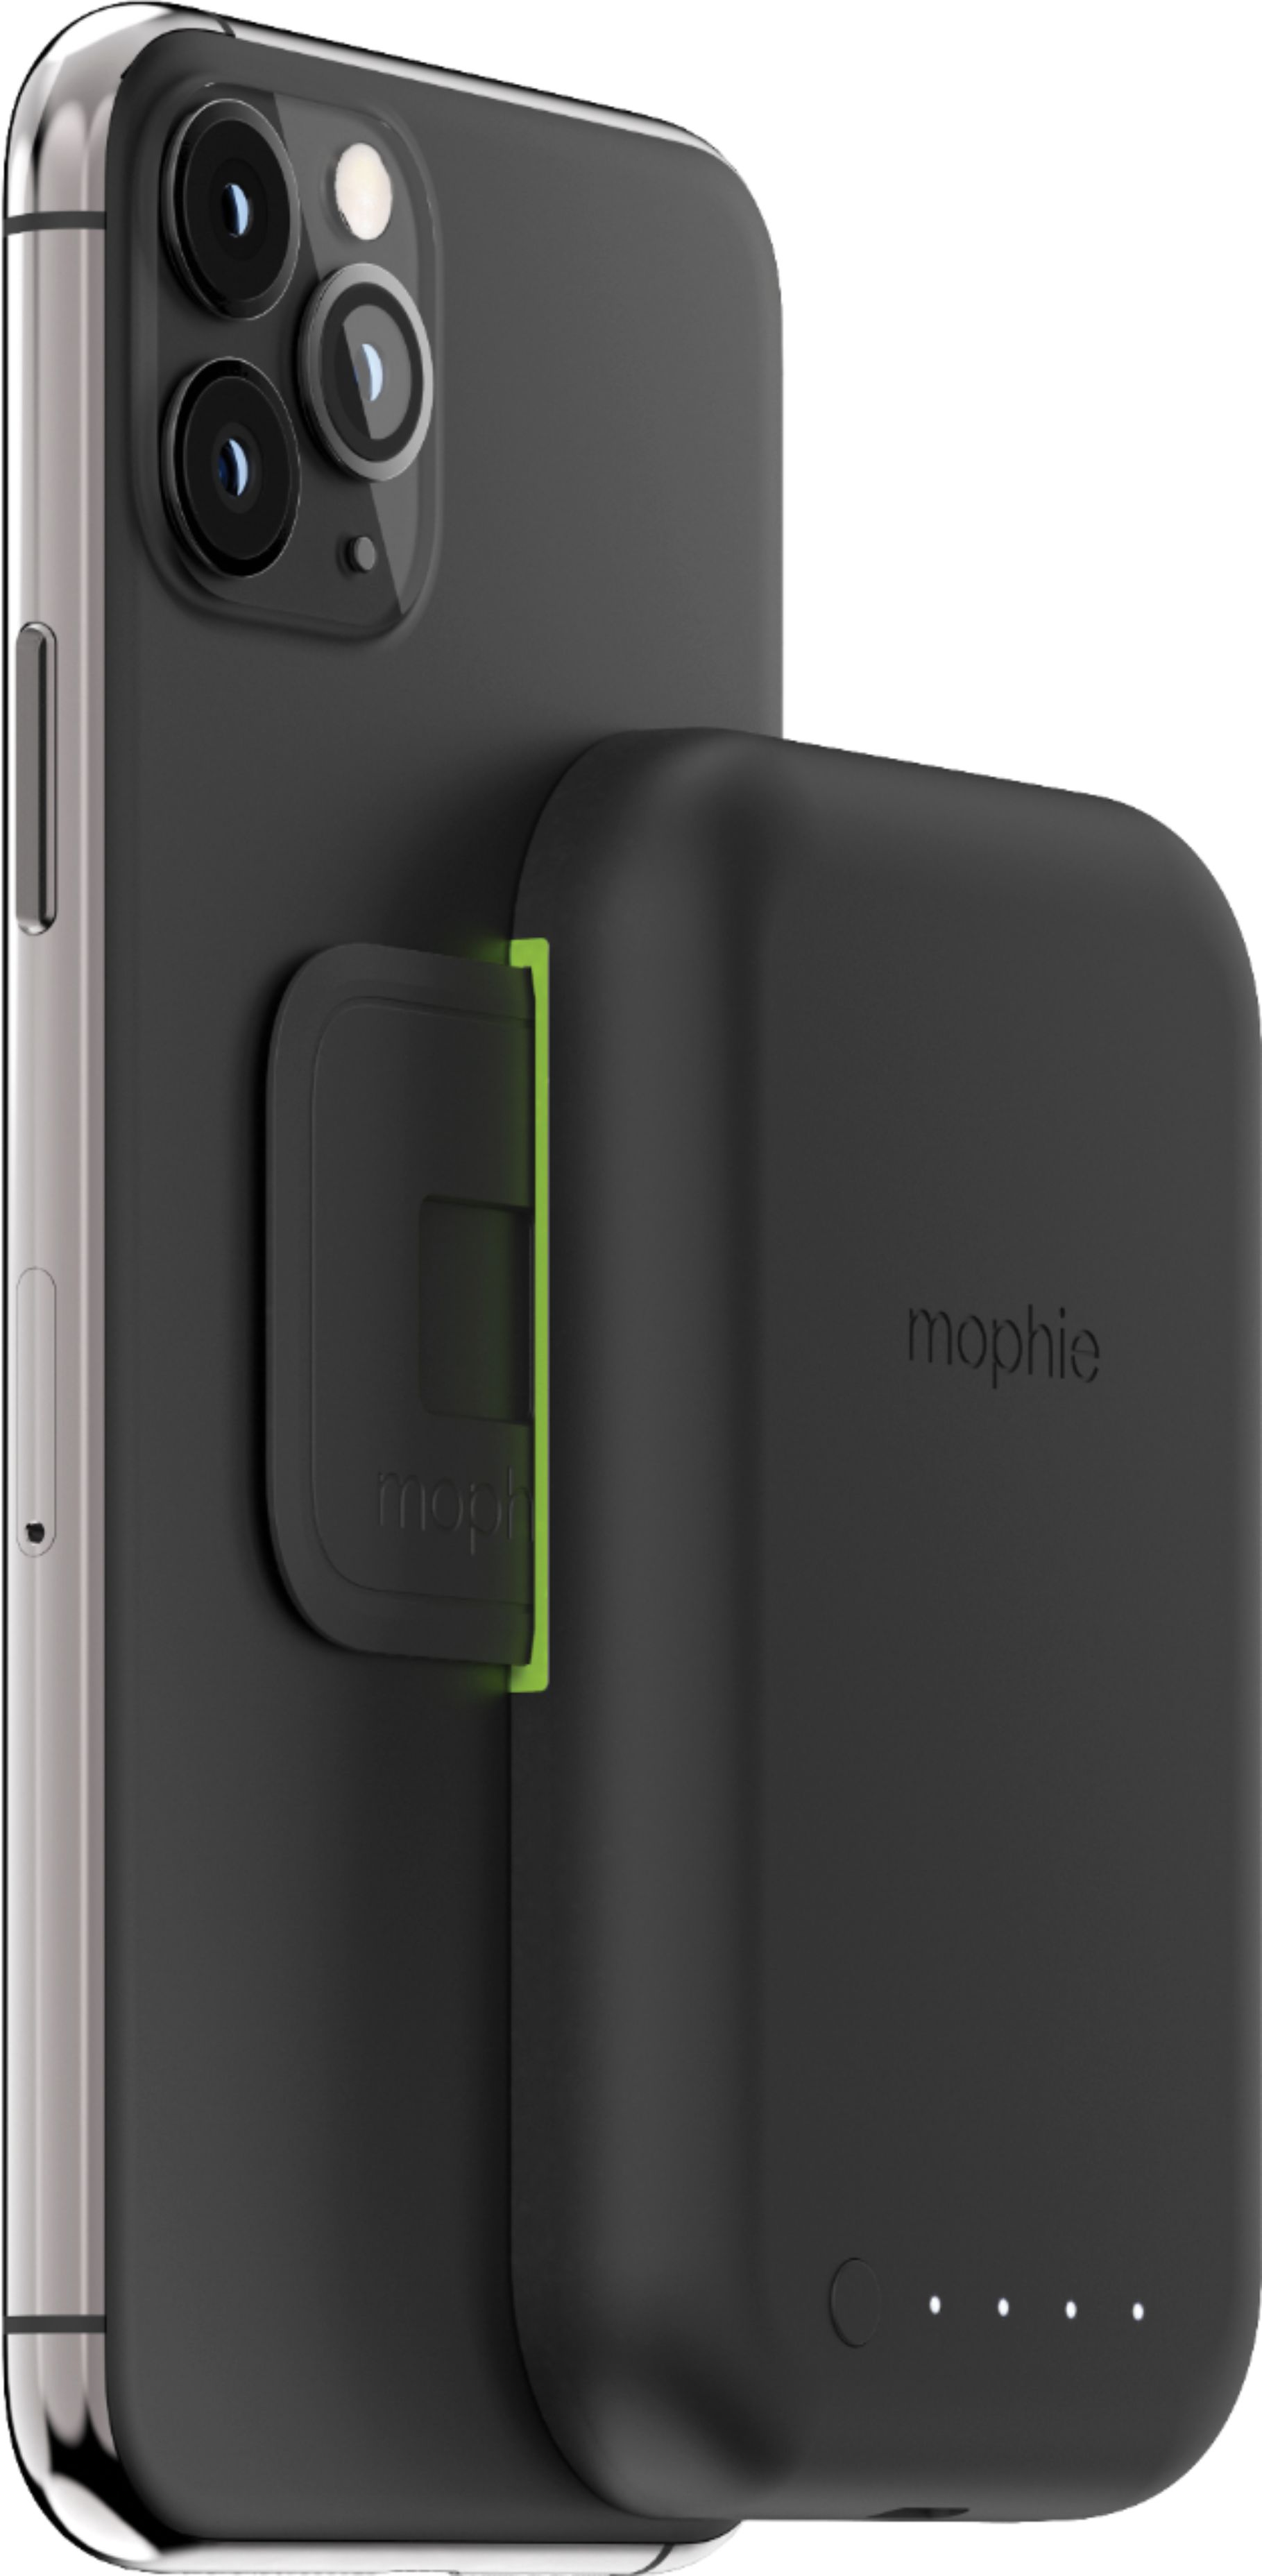 Angle View: mophie - Powerstation Go Rugged AC Portable Power with AC Outlet, USB-A Ports, Floodlight, and Jumper Cables - Black